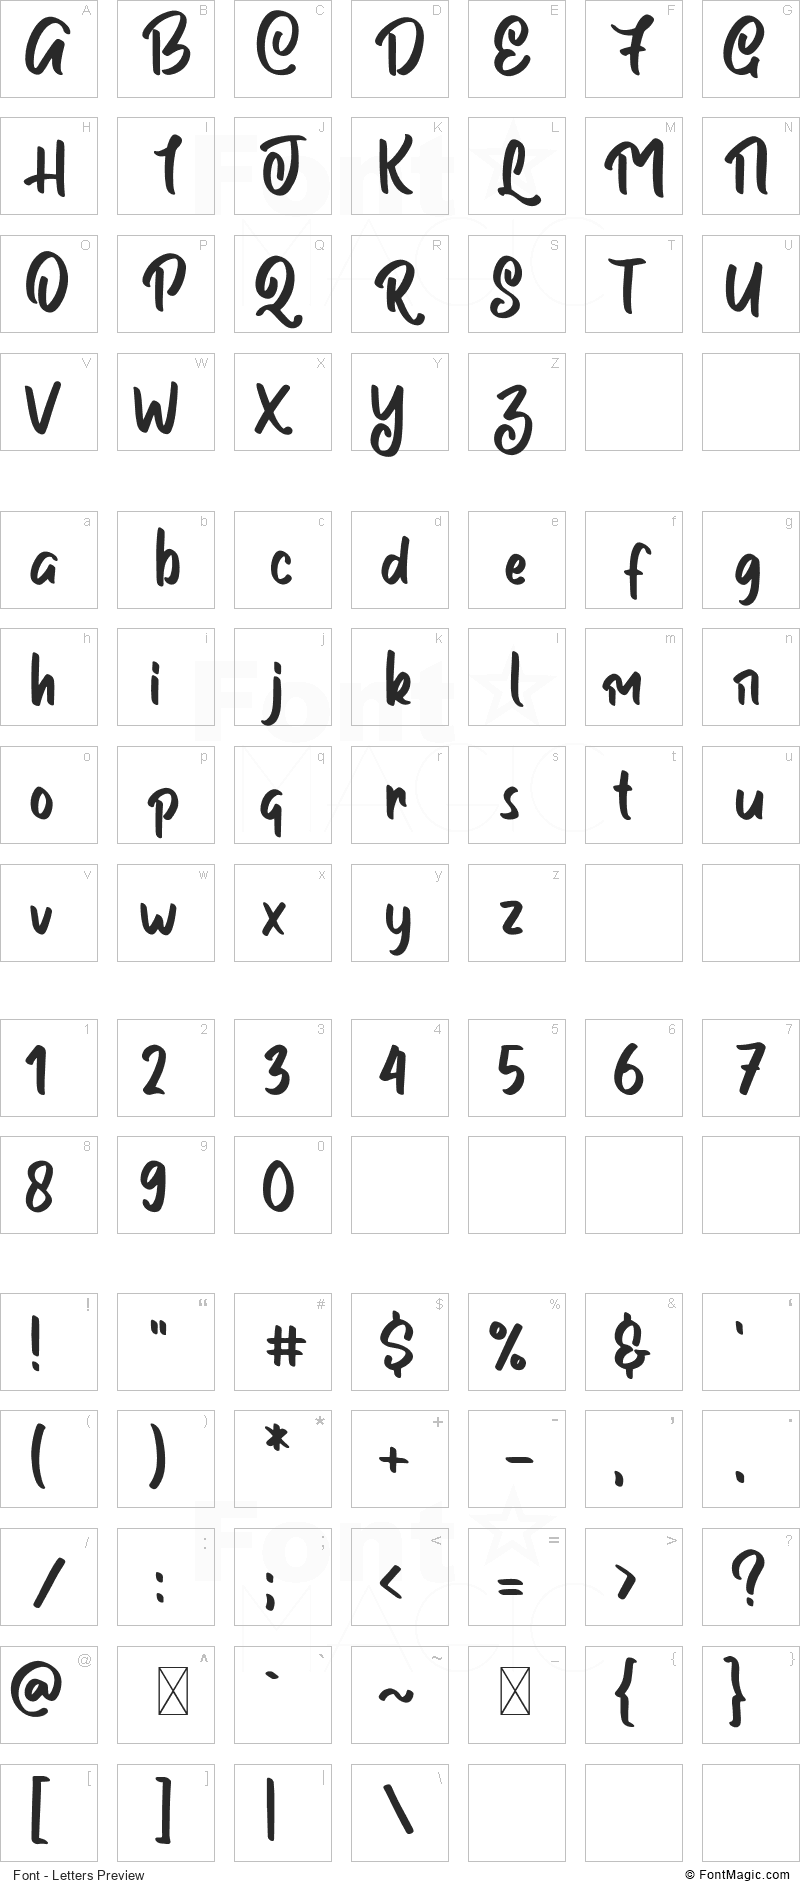 Oise Leliord Font - All Latters Preview Chart